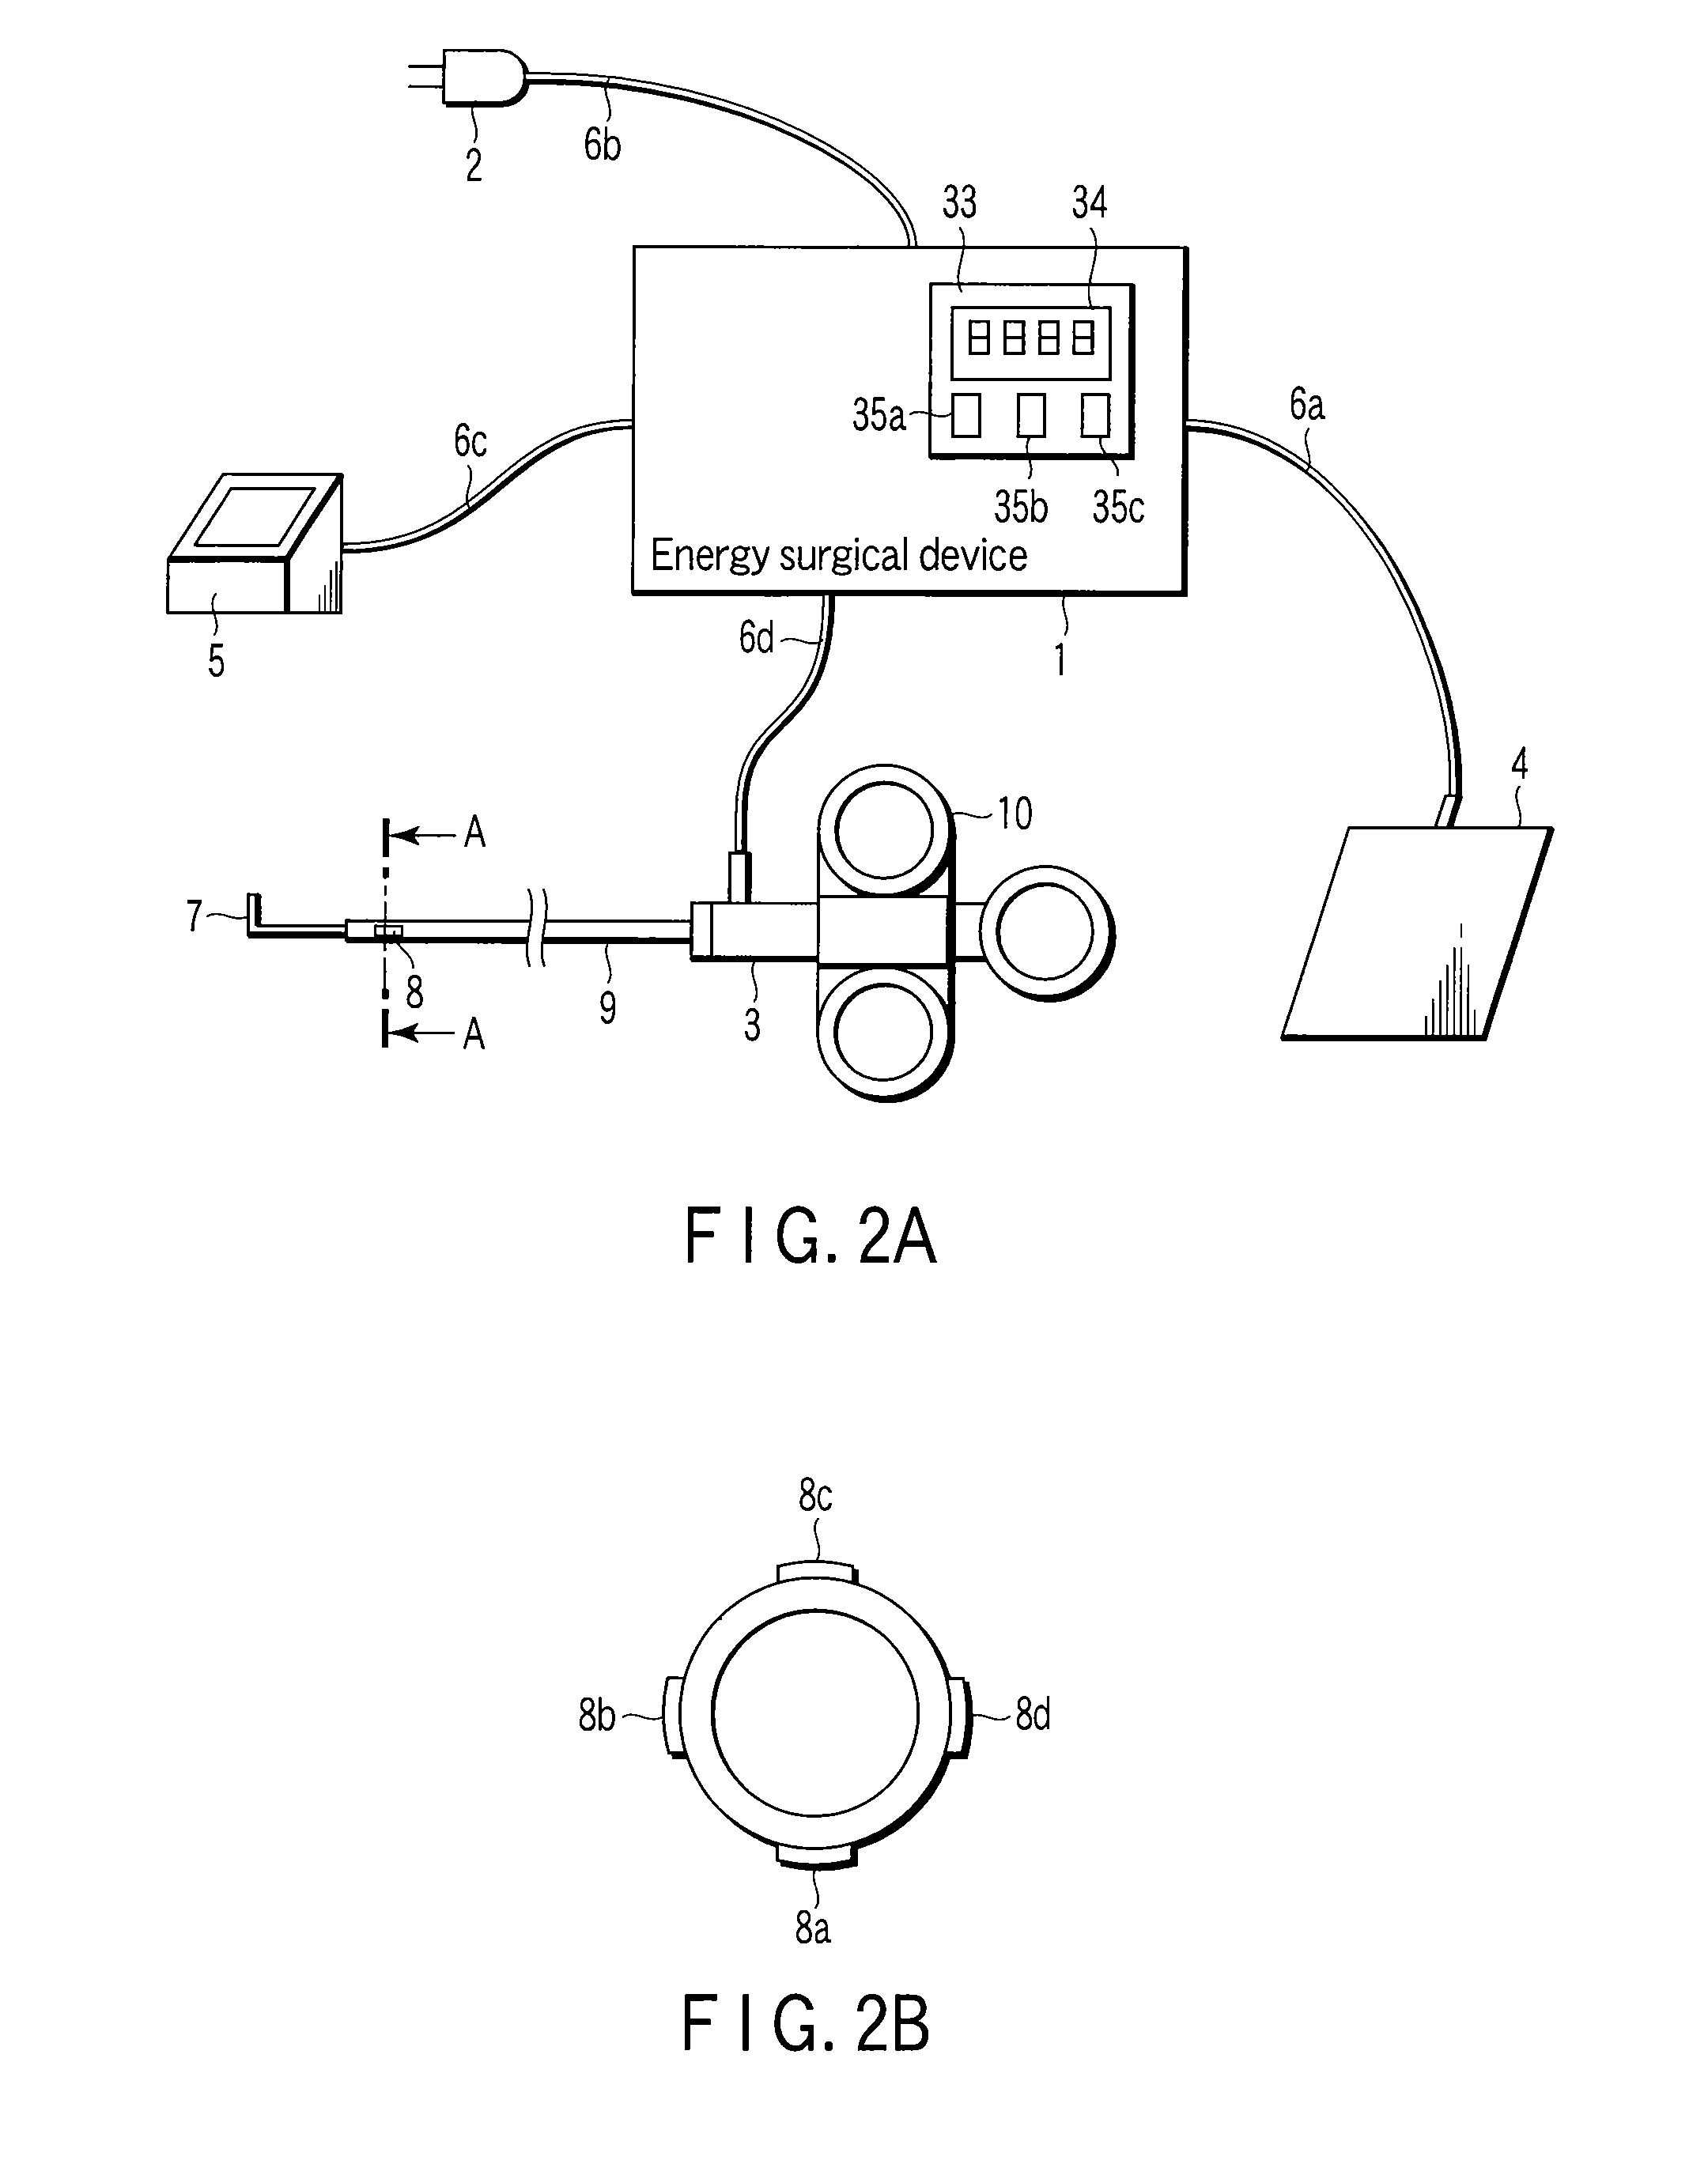 Energy surgical device